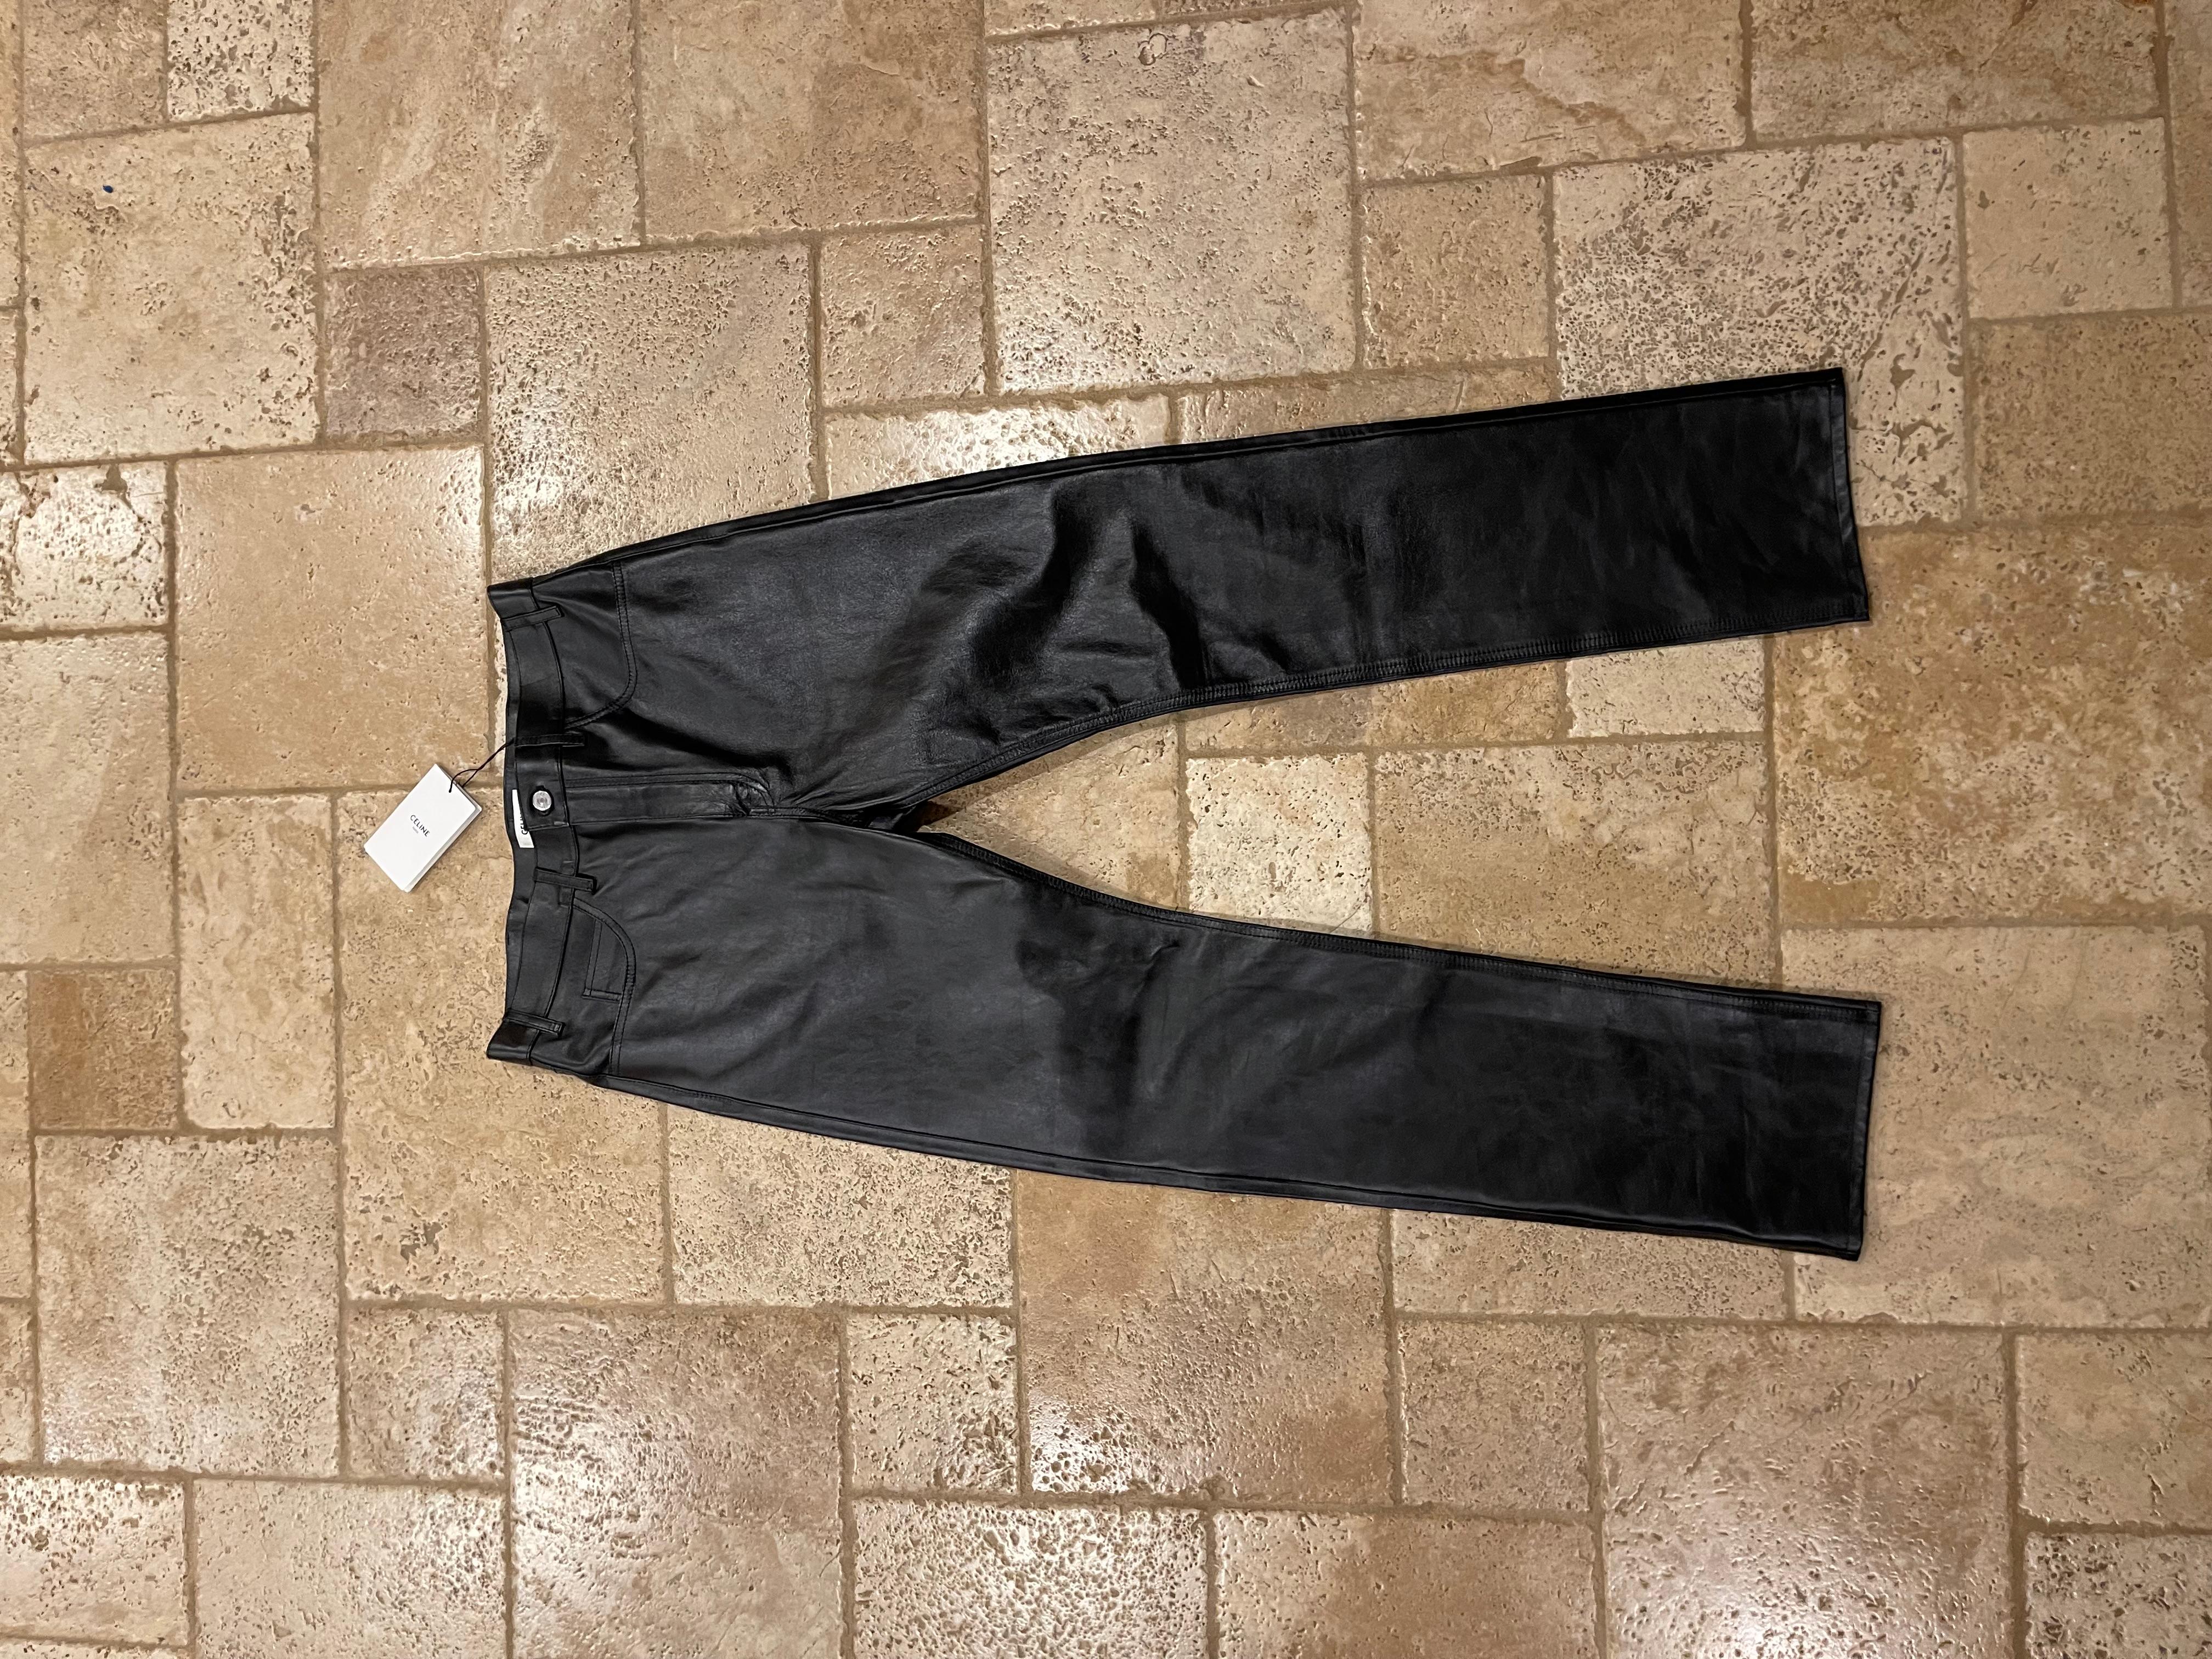 
Celine x Hedi Slimane FW19

Black Calfskin Leather Pants

Brand new w/ tags

Size 32


Sold out and limited leather pants

Amazing quality calfskin leather with a beautiful black sheen to it.

Selling for less then retail!


Measurements:

Waist: